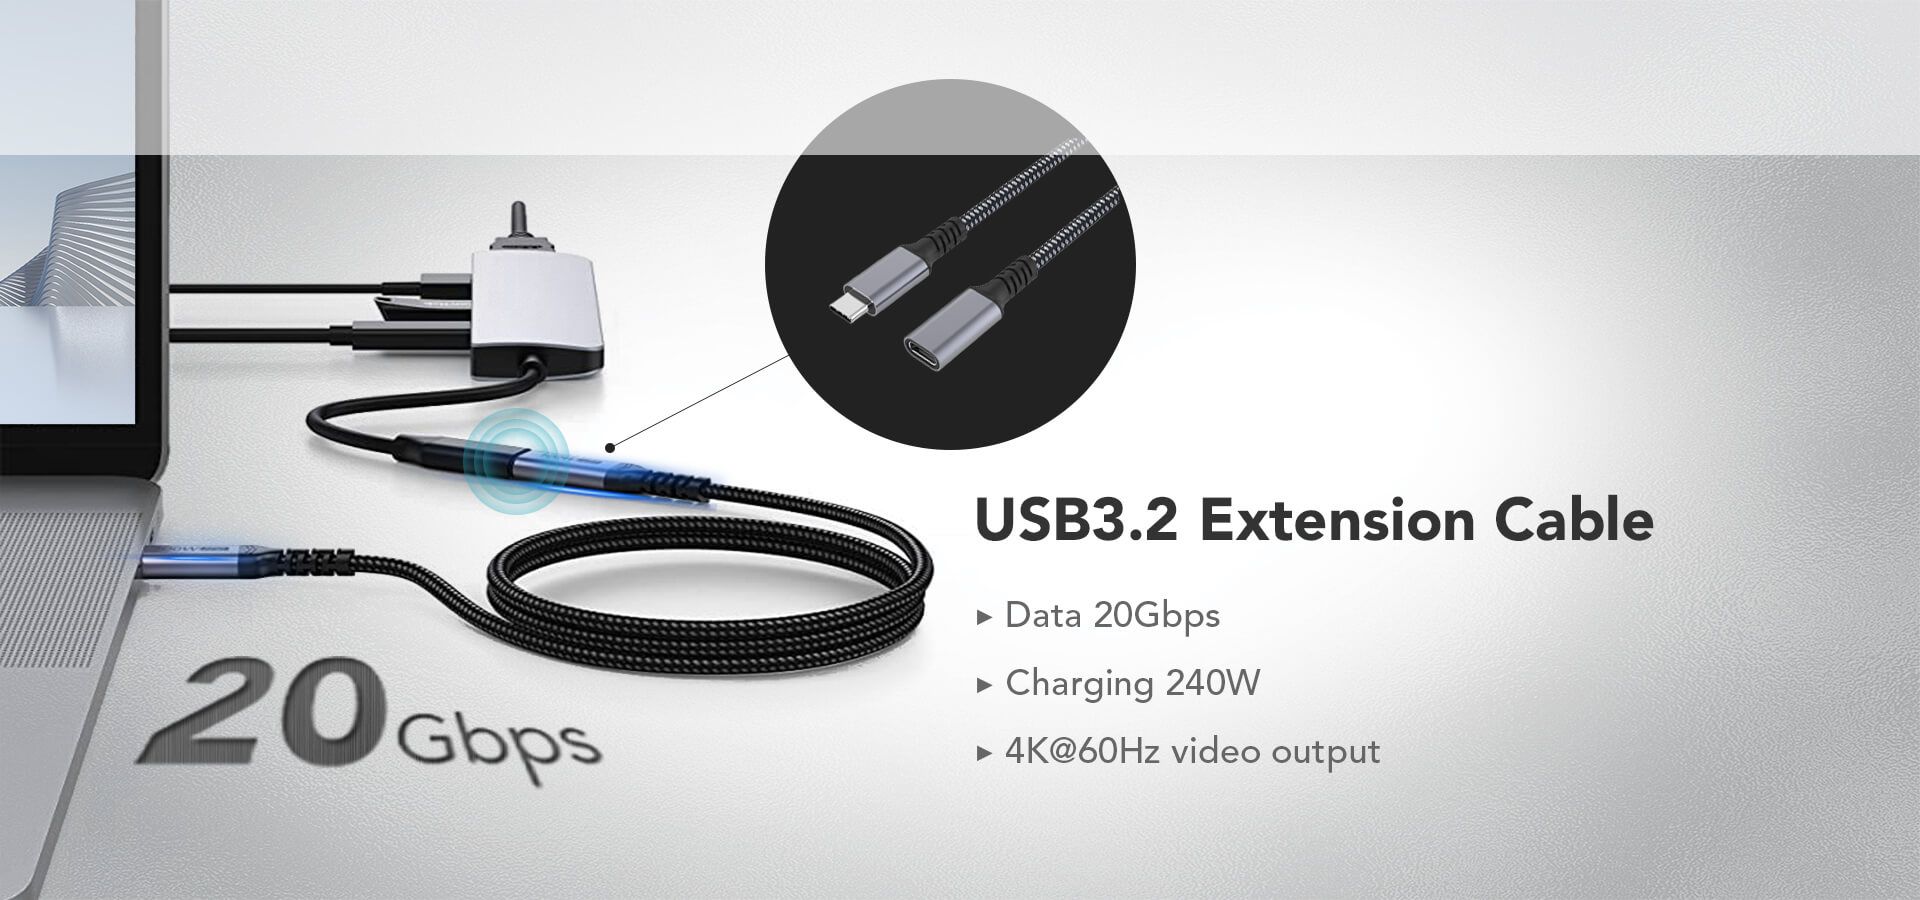 USB 3.2 Extension Cable